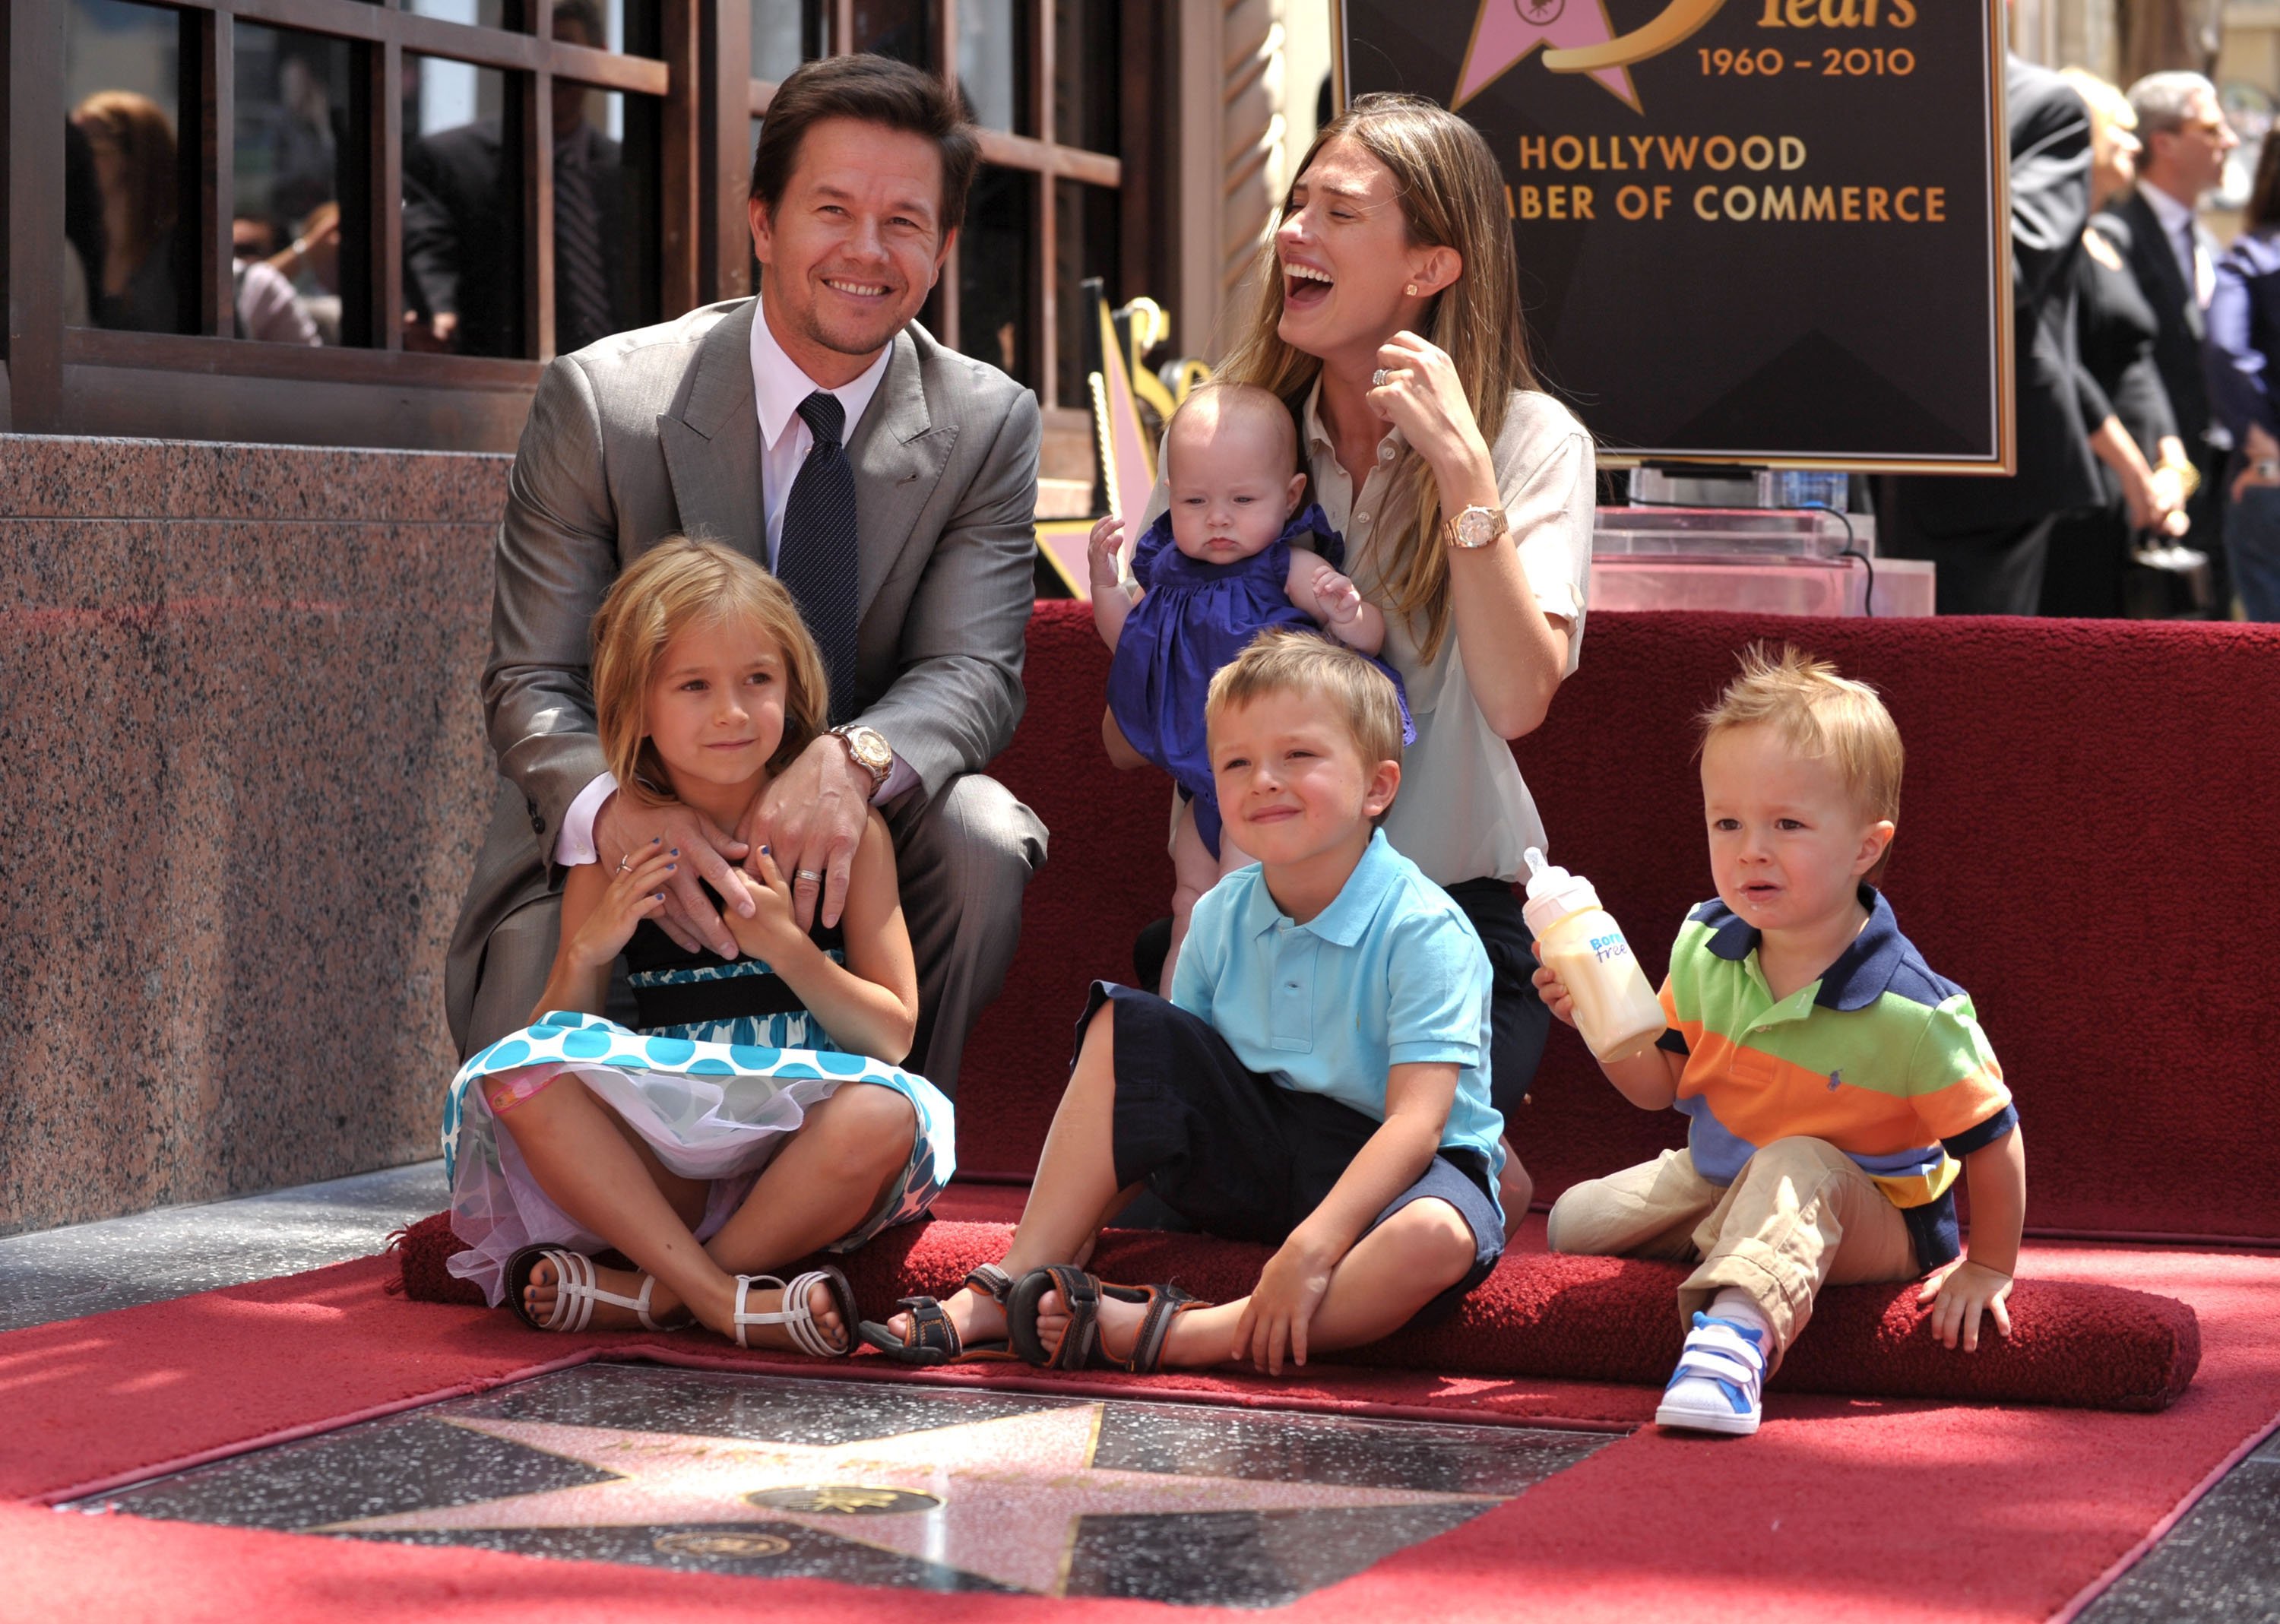 Actor Mark Wahlberg and wife Rhea Durham with their children Ella, Michael, Brendan, and Grace attend Wahlberg's Hollywood Walk of Fame Star Cermony on July 29, 2010 in Hollywood, California. | Source: Getty Images